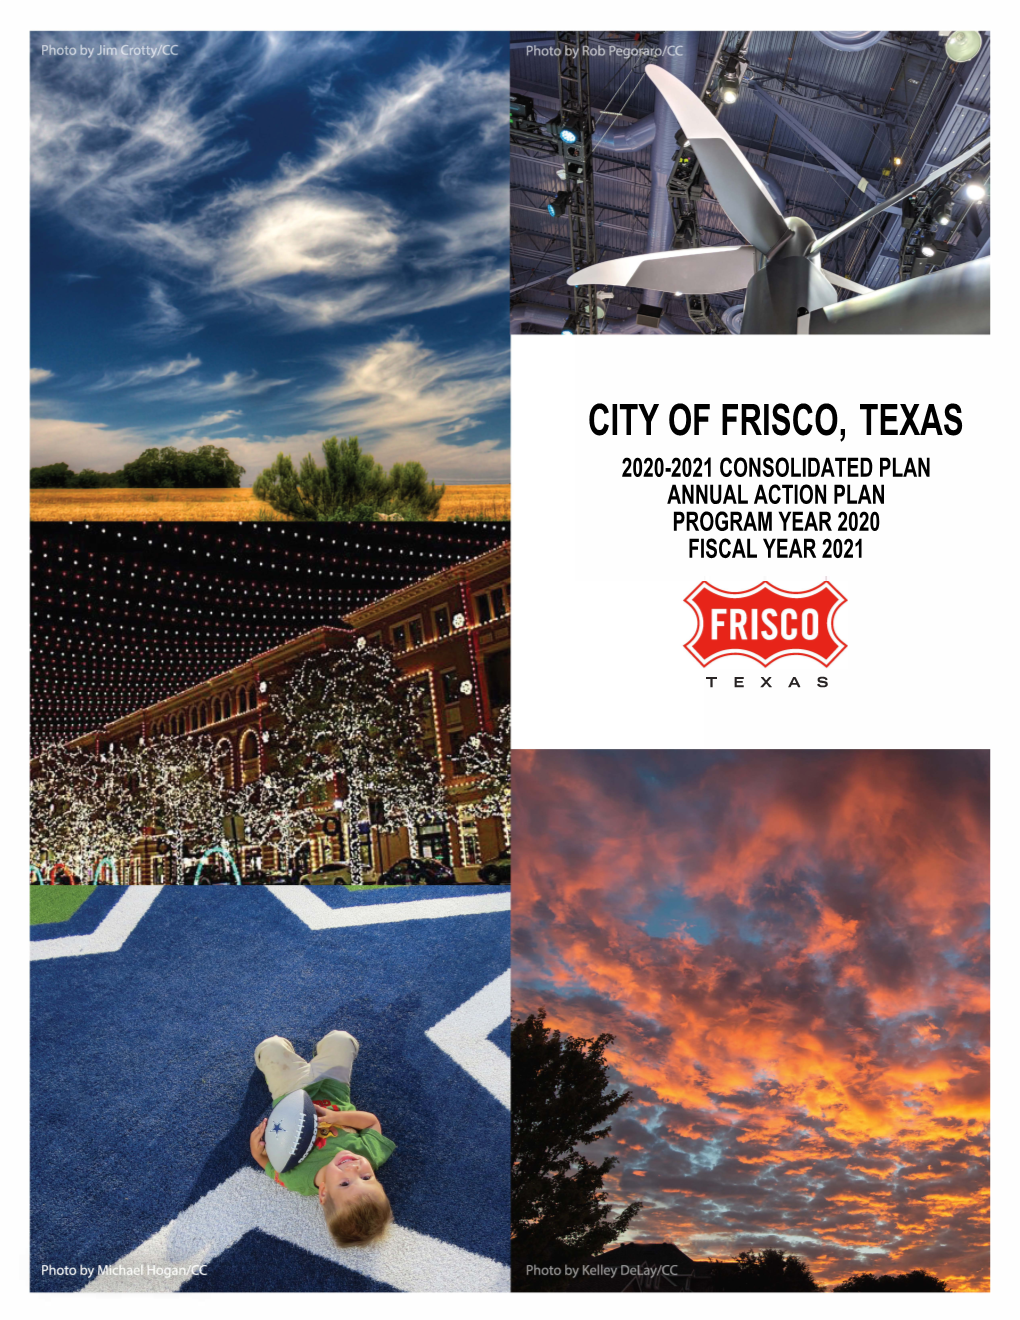 City of Frisco, Texas 2020-2021 Consolidated Plan Annual Action Plan Program Year 2020 Fiscal Year 2021